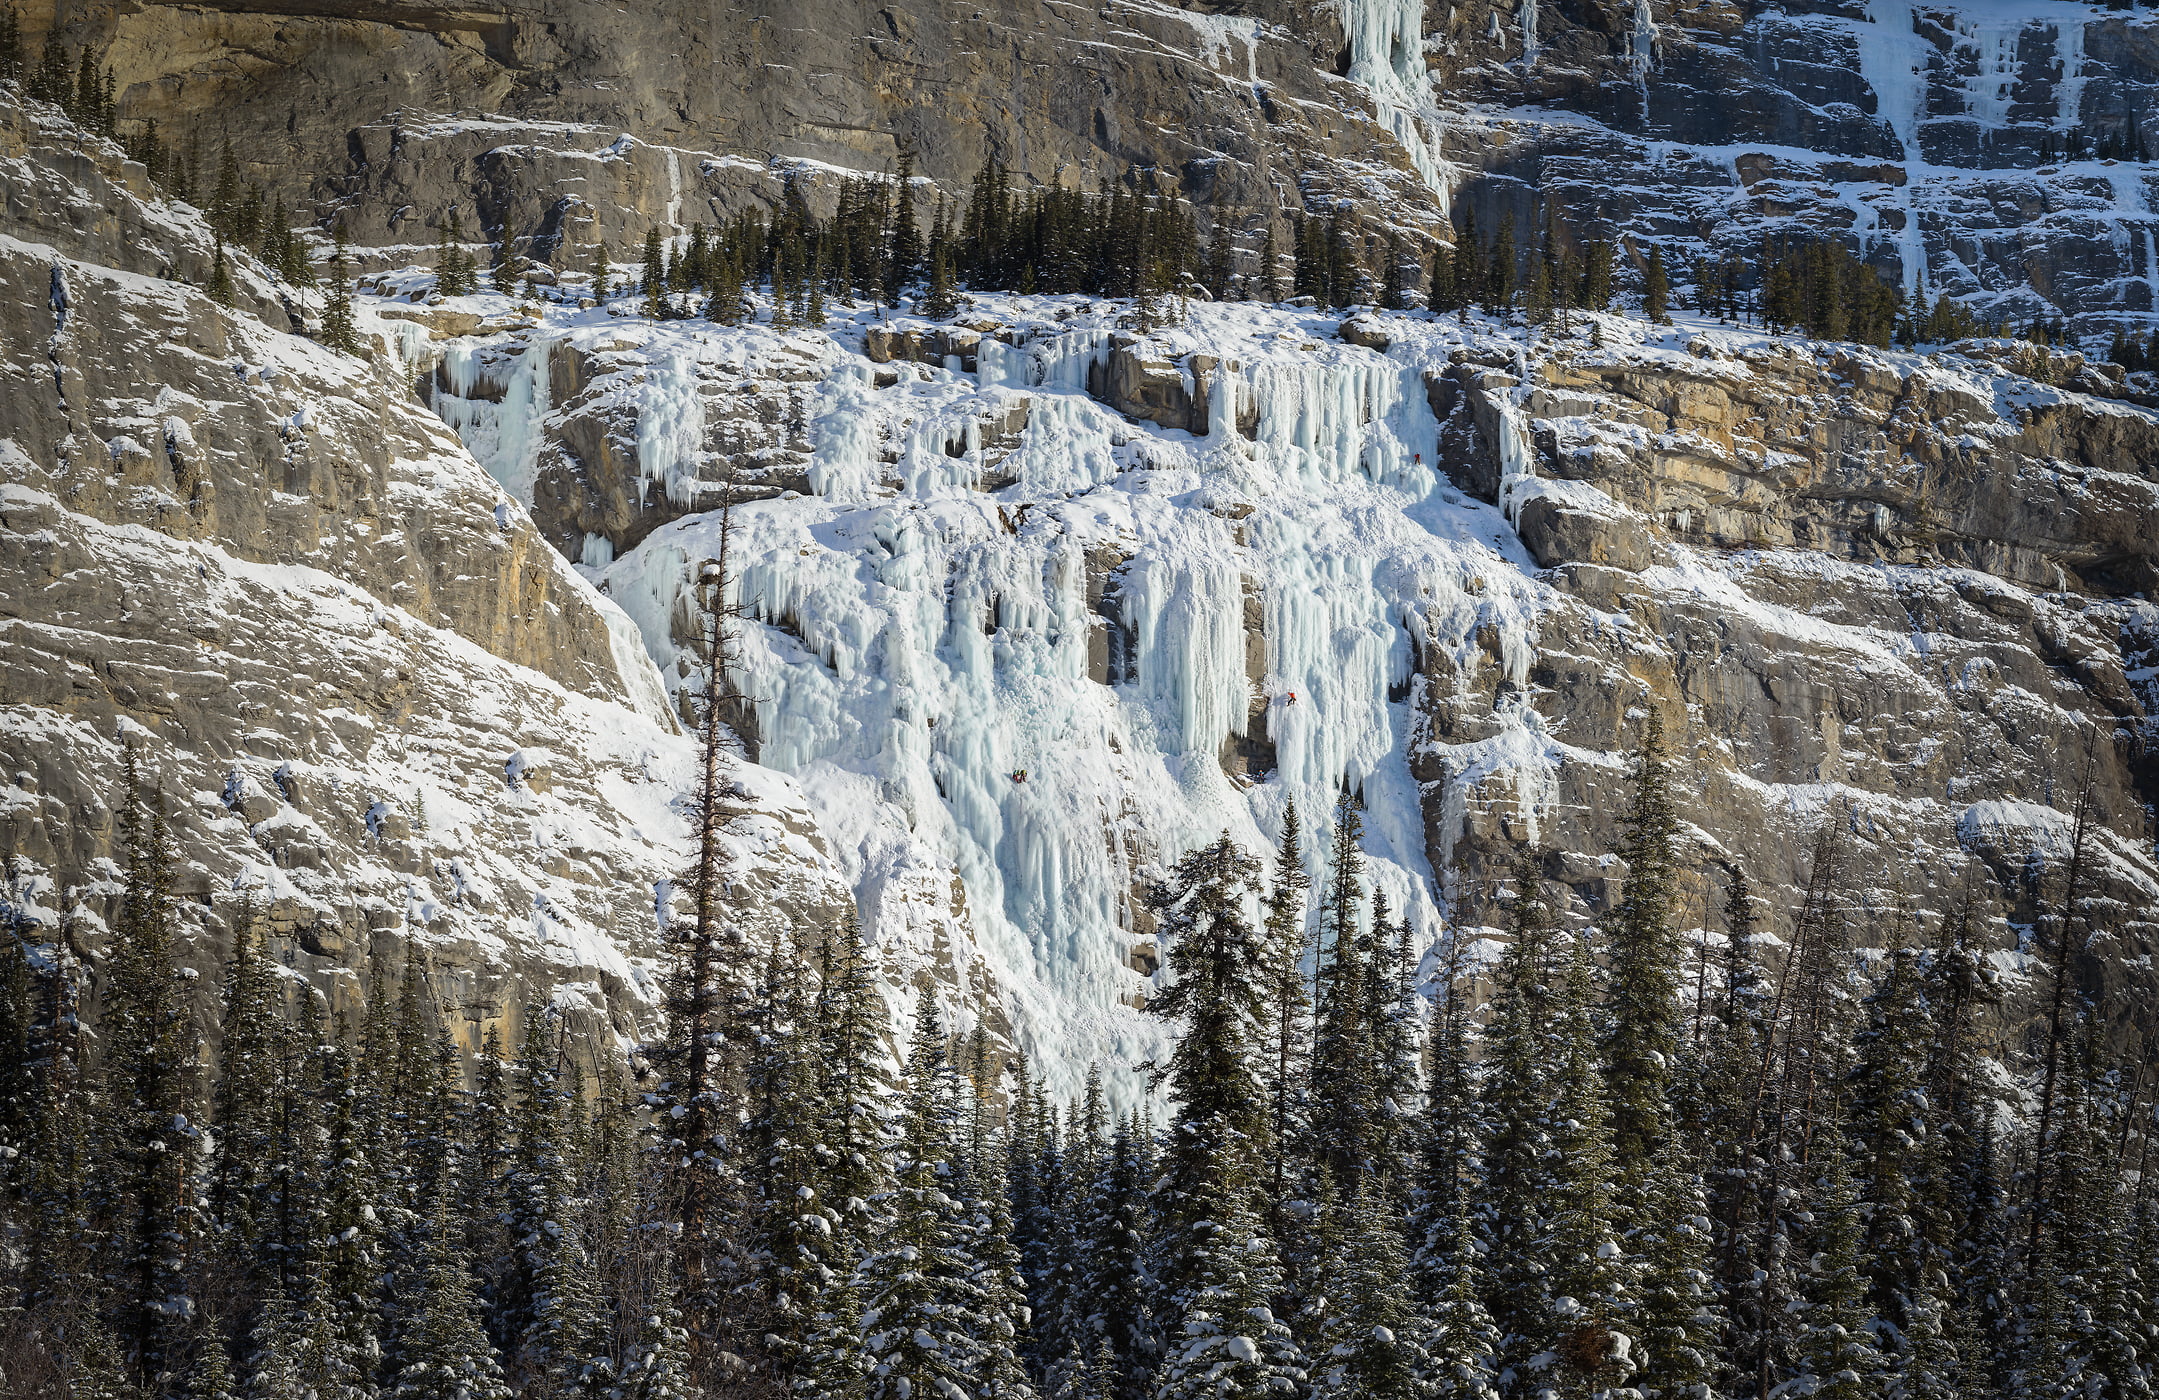 400 megapixels! A very high resolution, large-format VAST photo print of ice climbers on a rock wall; landscape photograph created by Scott Dimond on the Weeping Wall along the Icefields Parkway in Banff National Park, Alberta, Canada.